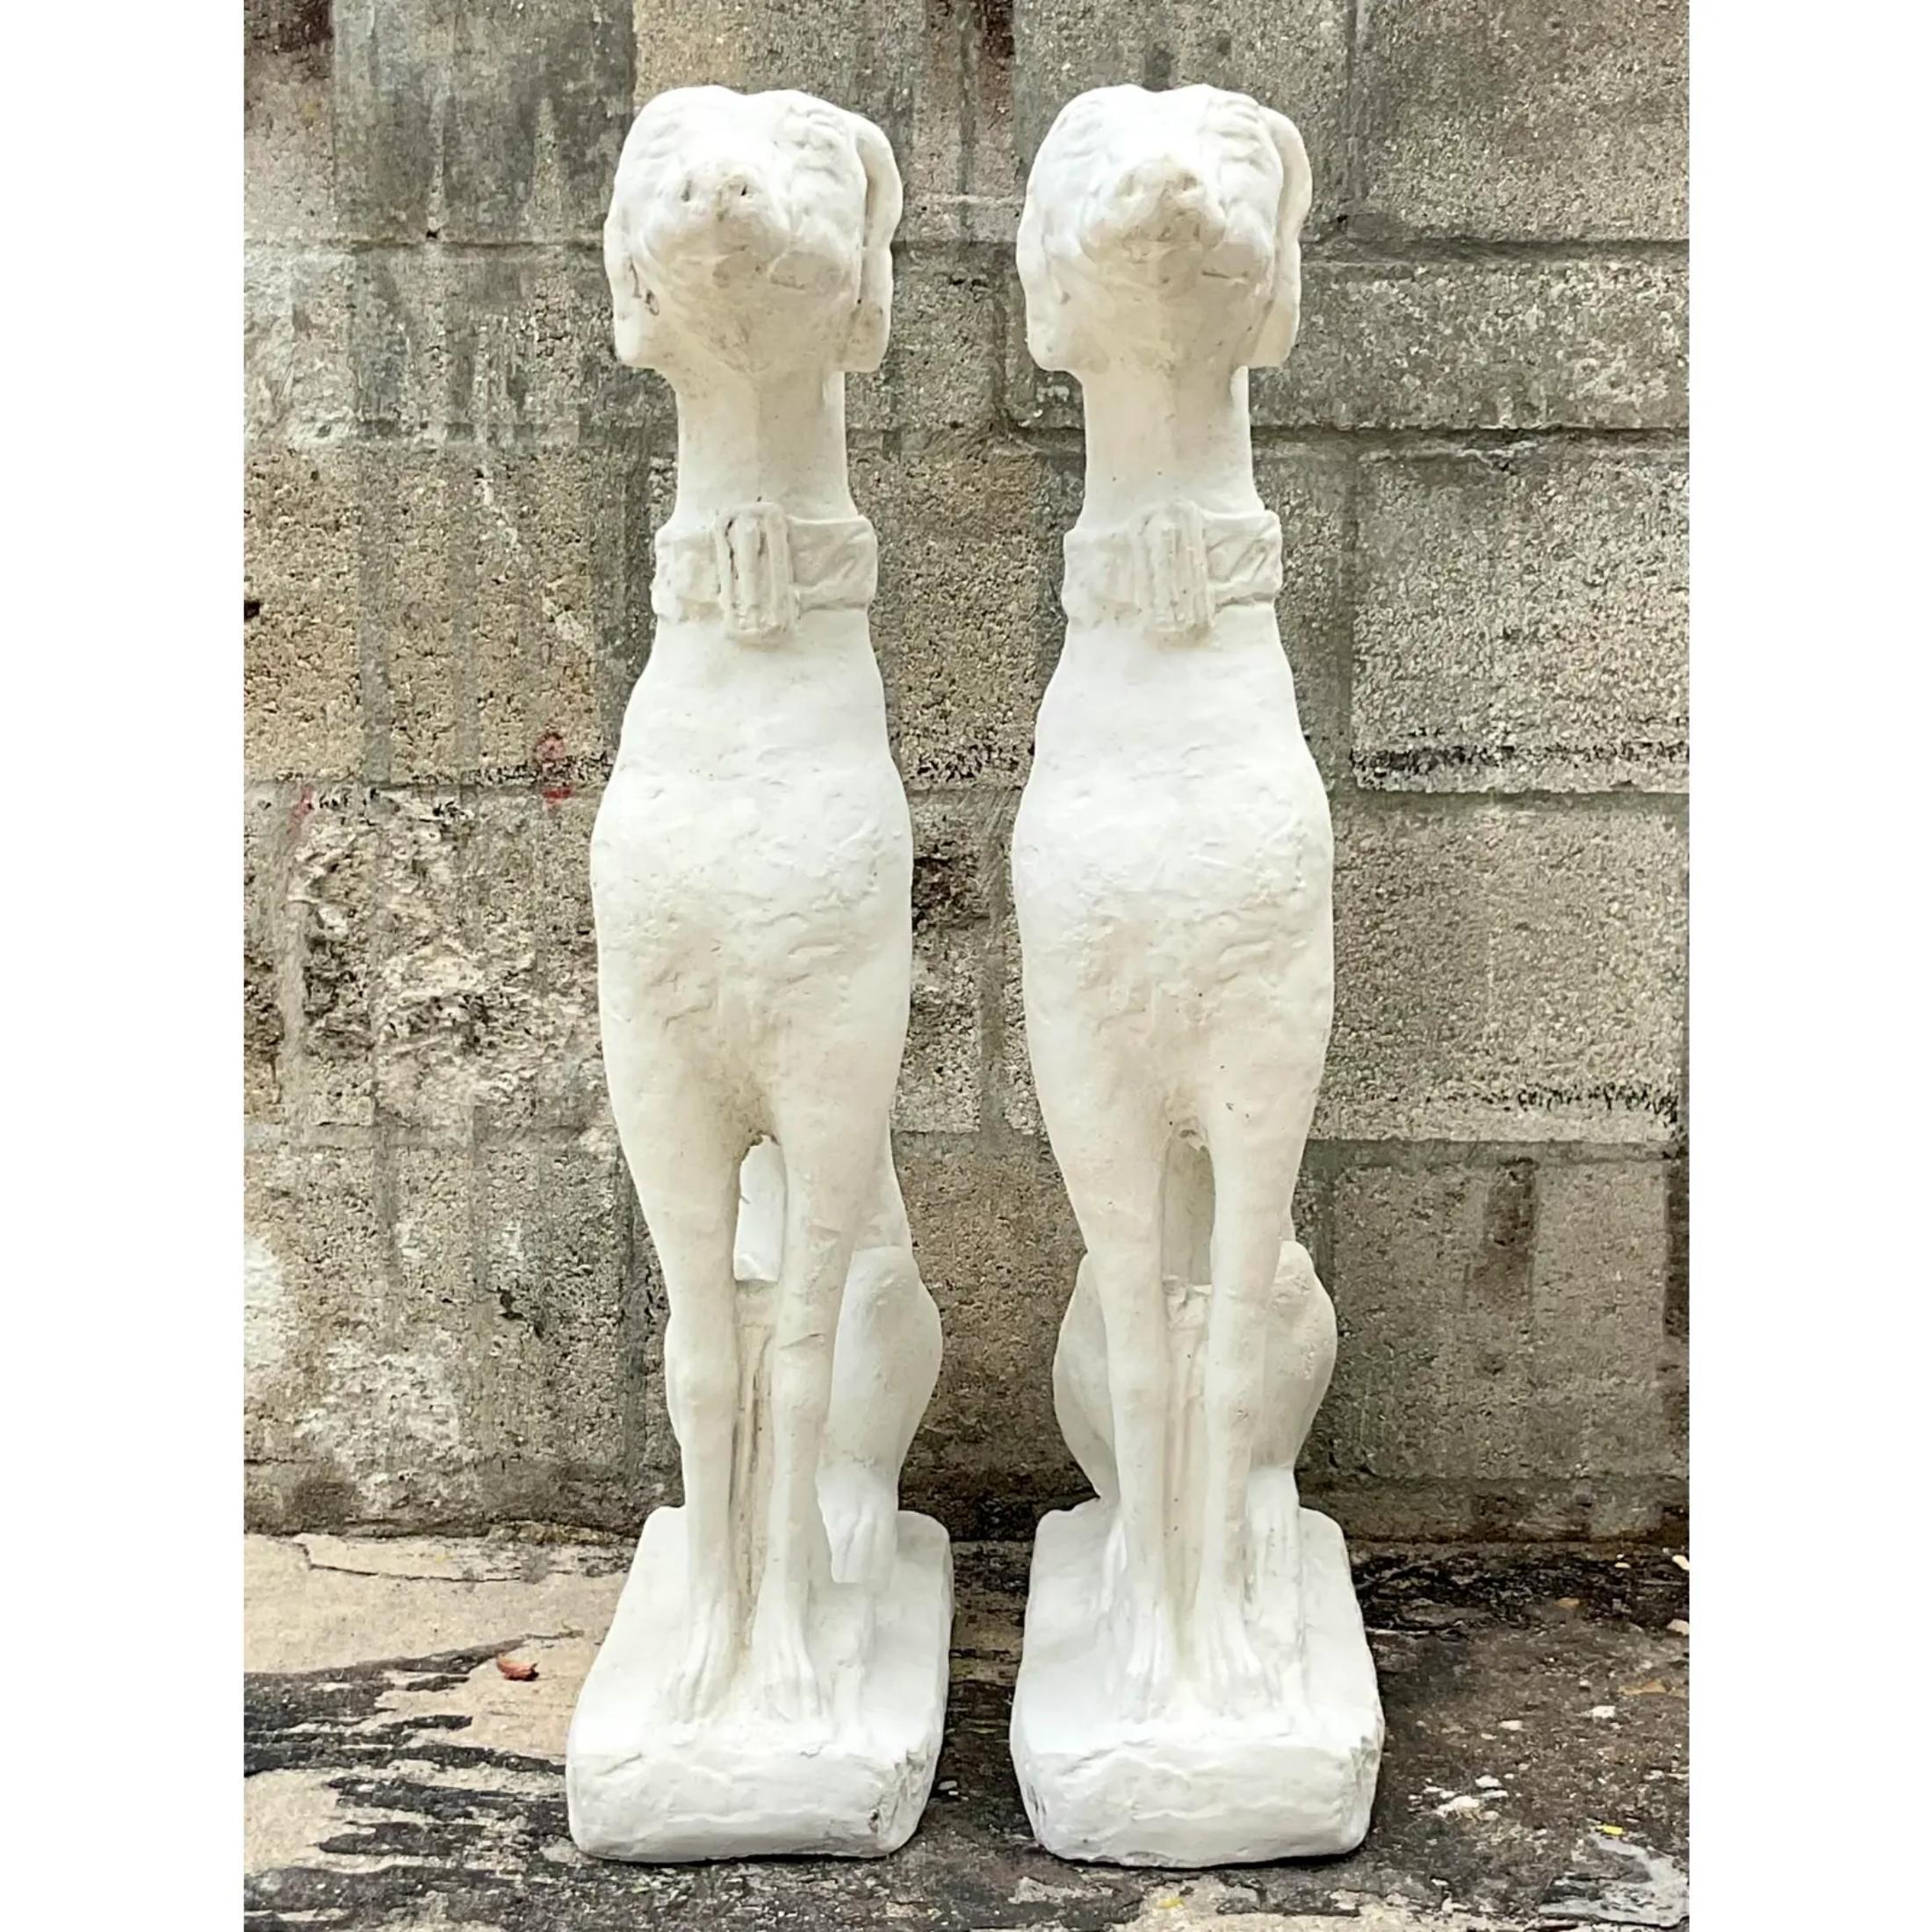 Vintage Regency pair of dogs. Tall and handsome greyhounds. Made of a solid cement that has been painted white. Acquired from a Palm Beach estate